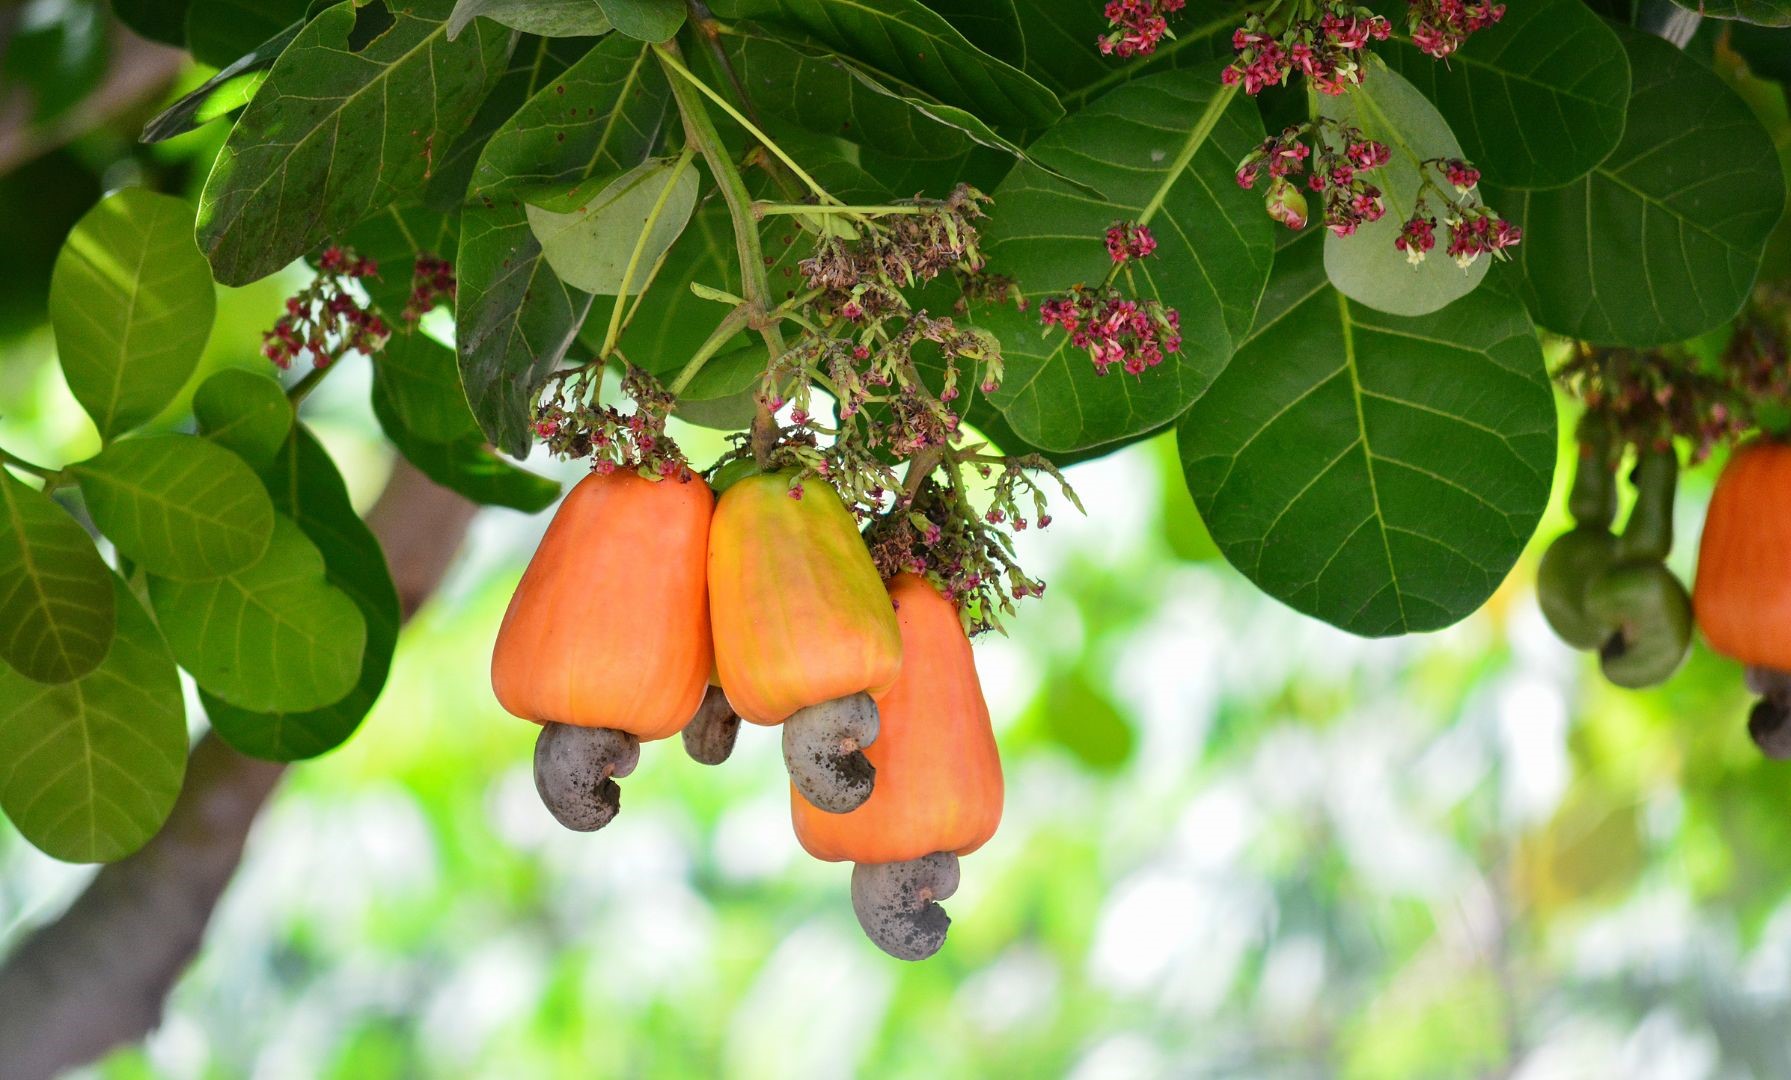 Cashew A high Profitability Versatile Crop - Best Practices, Uses and Market